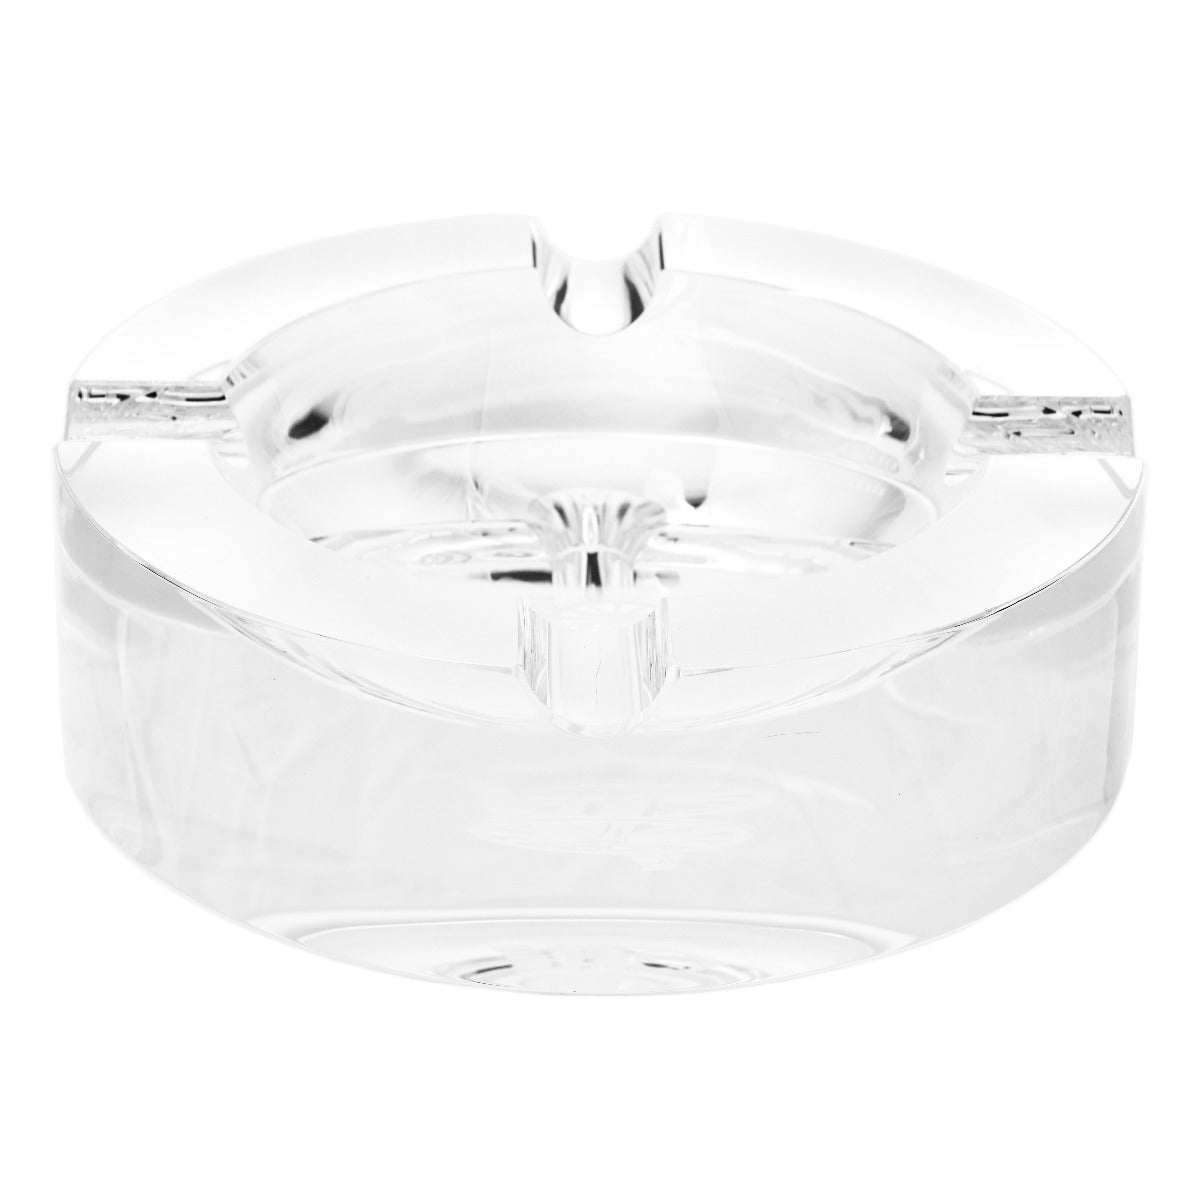 A clear Kirby Allison Glass Cigar Ash Tray - Round smoking accessory from KirbyAllison.com.